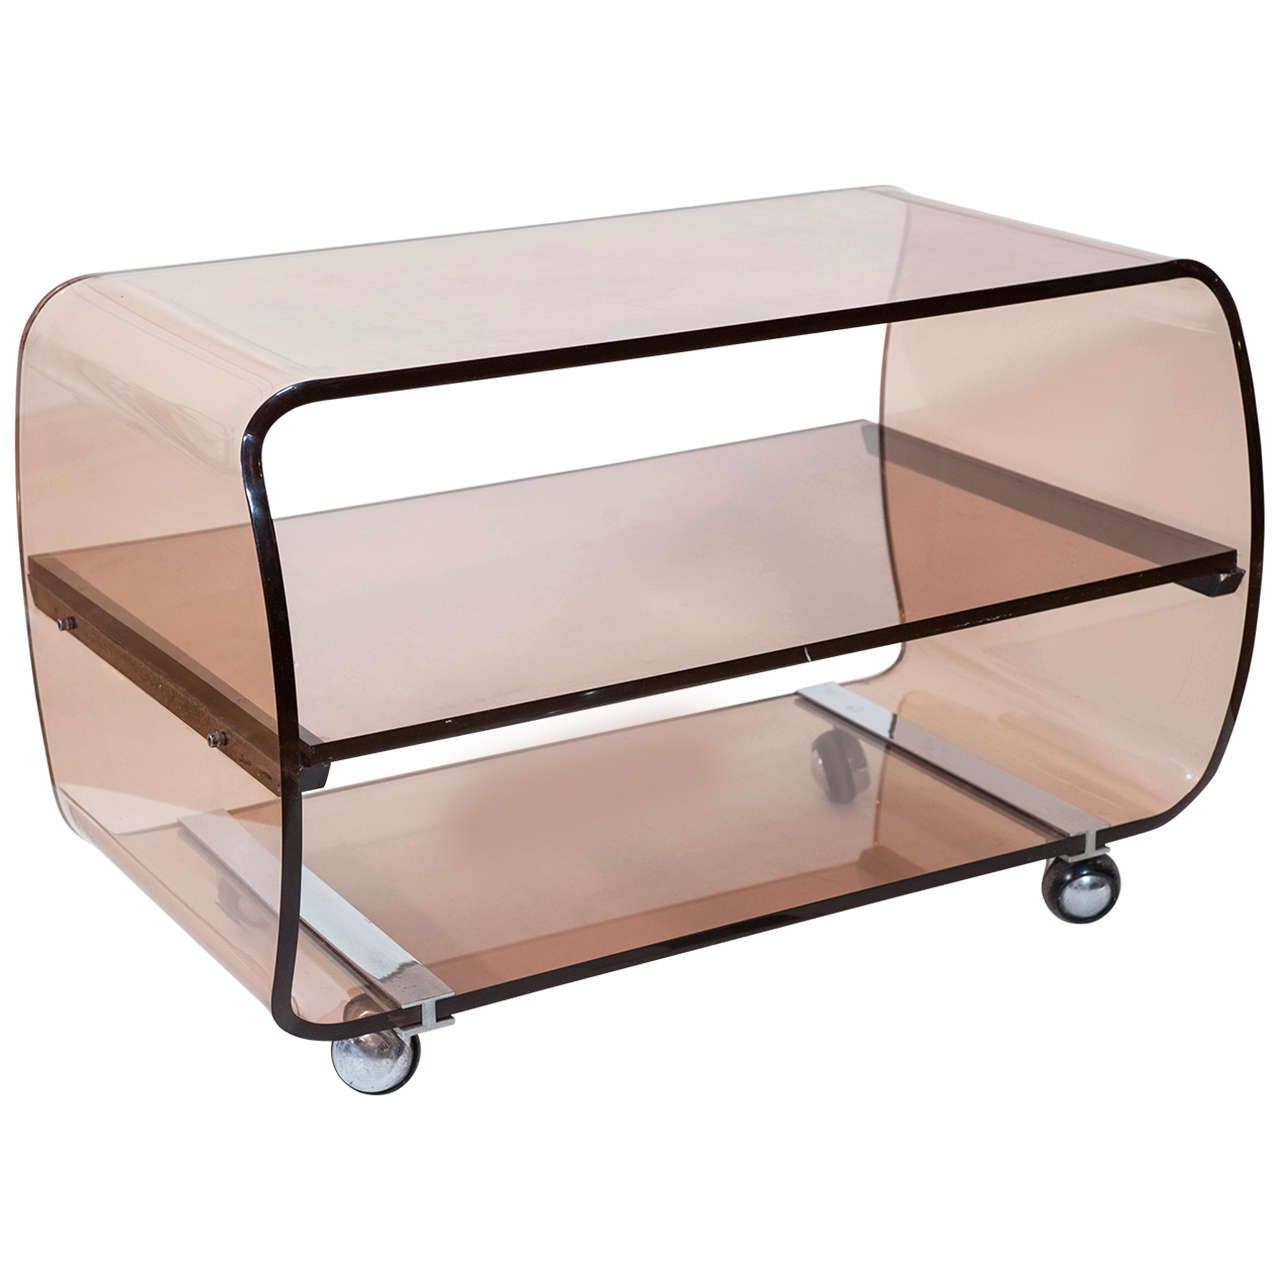 Lucite Trolley Attributed to Roche Bobois